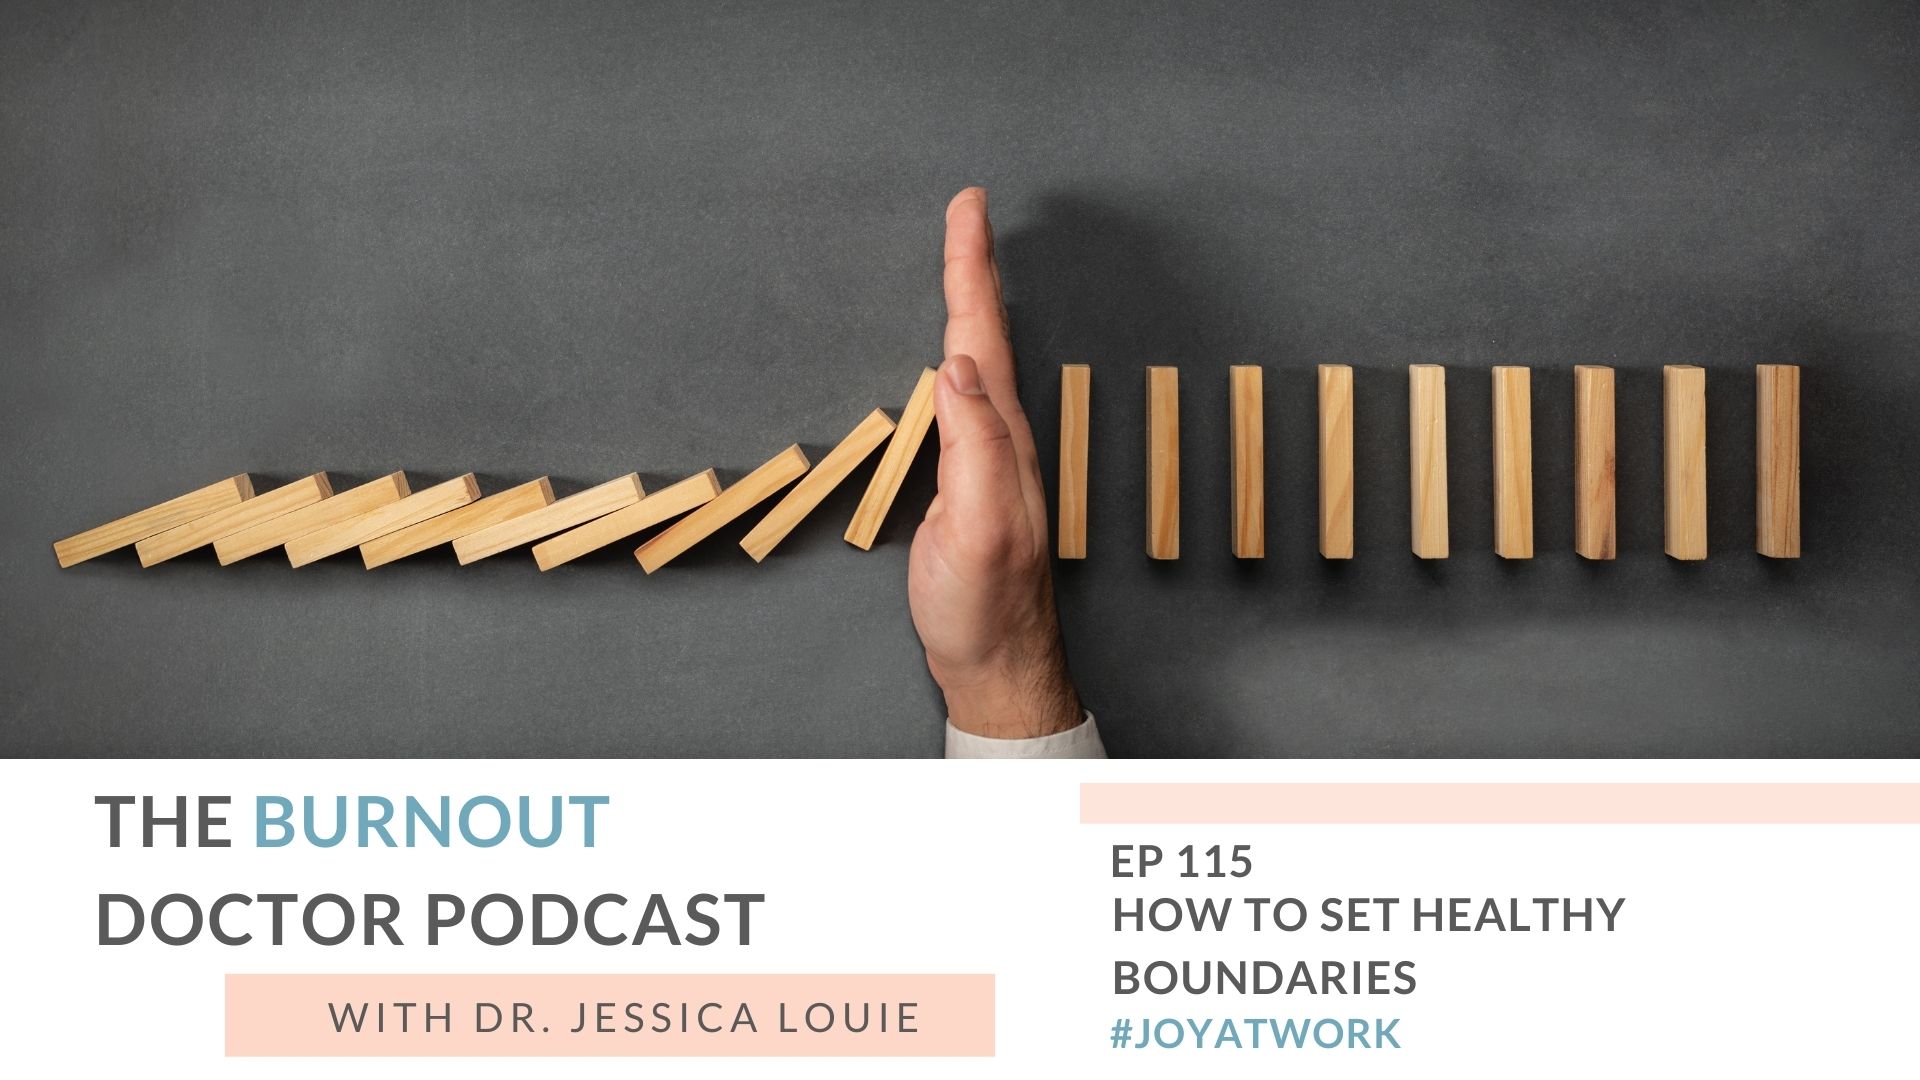 How to set healthy boundaries in life for burnout. Pharmacist burnout help. The Burnout Doctor Podcast with Dr. Jessica Louie